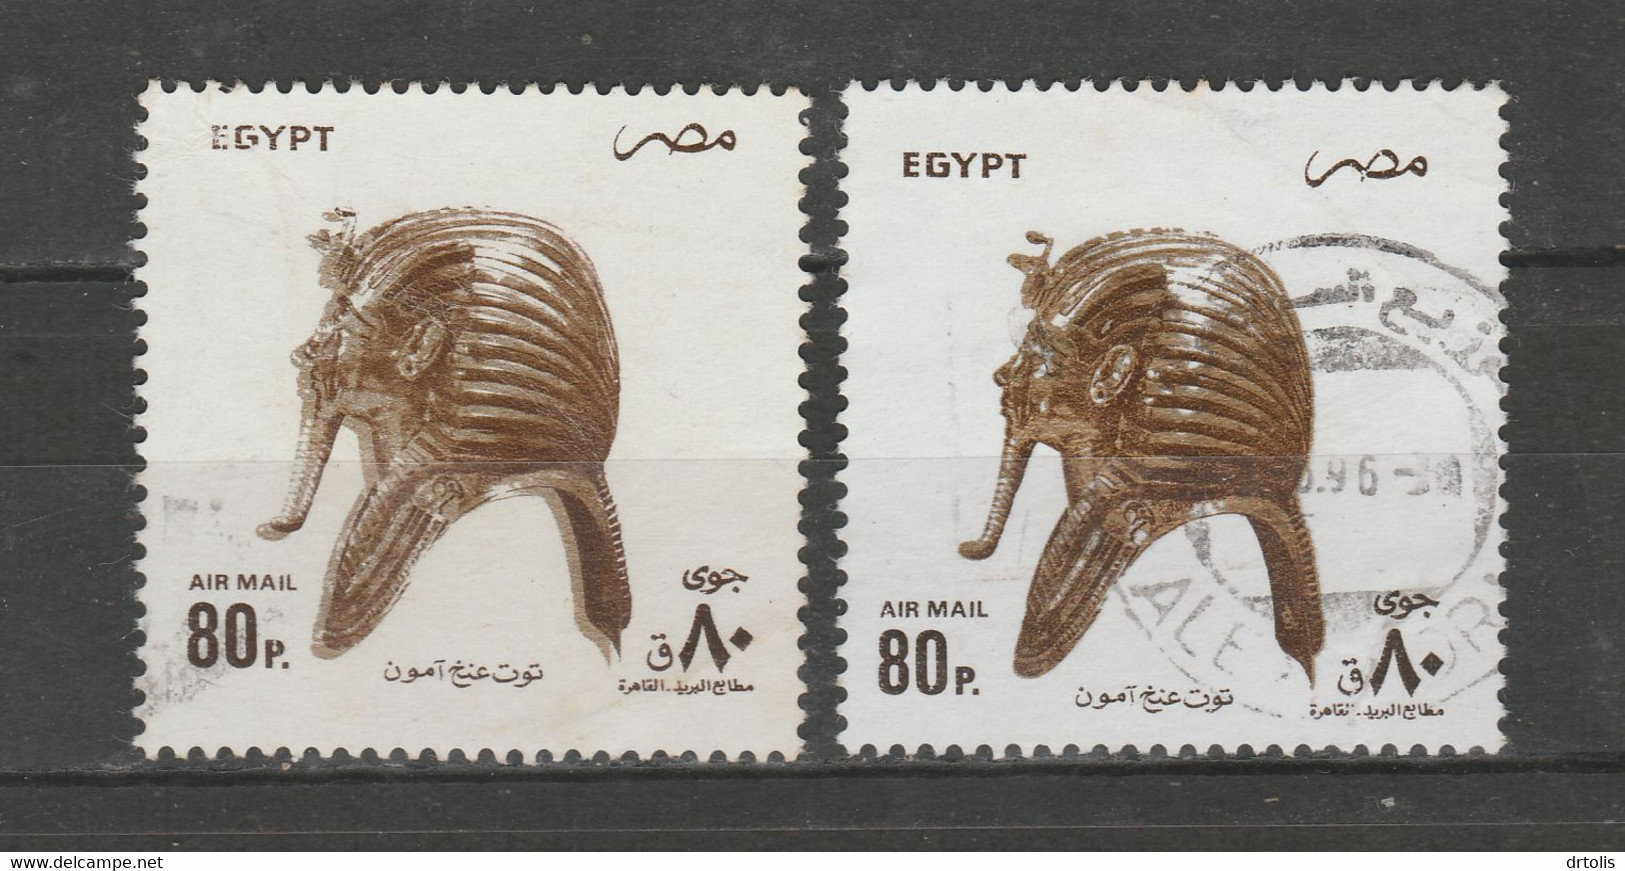 EGYPT / PRINTING ERROR / VF USED - Used Stamps